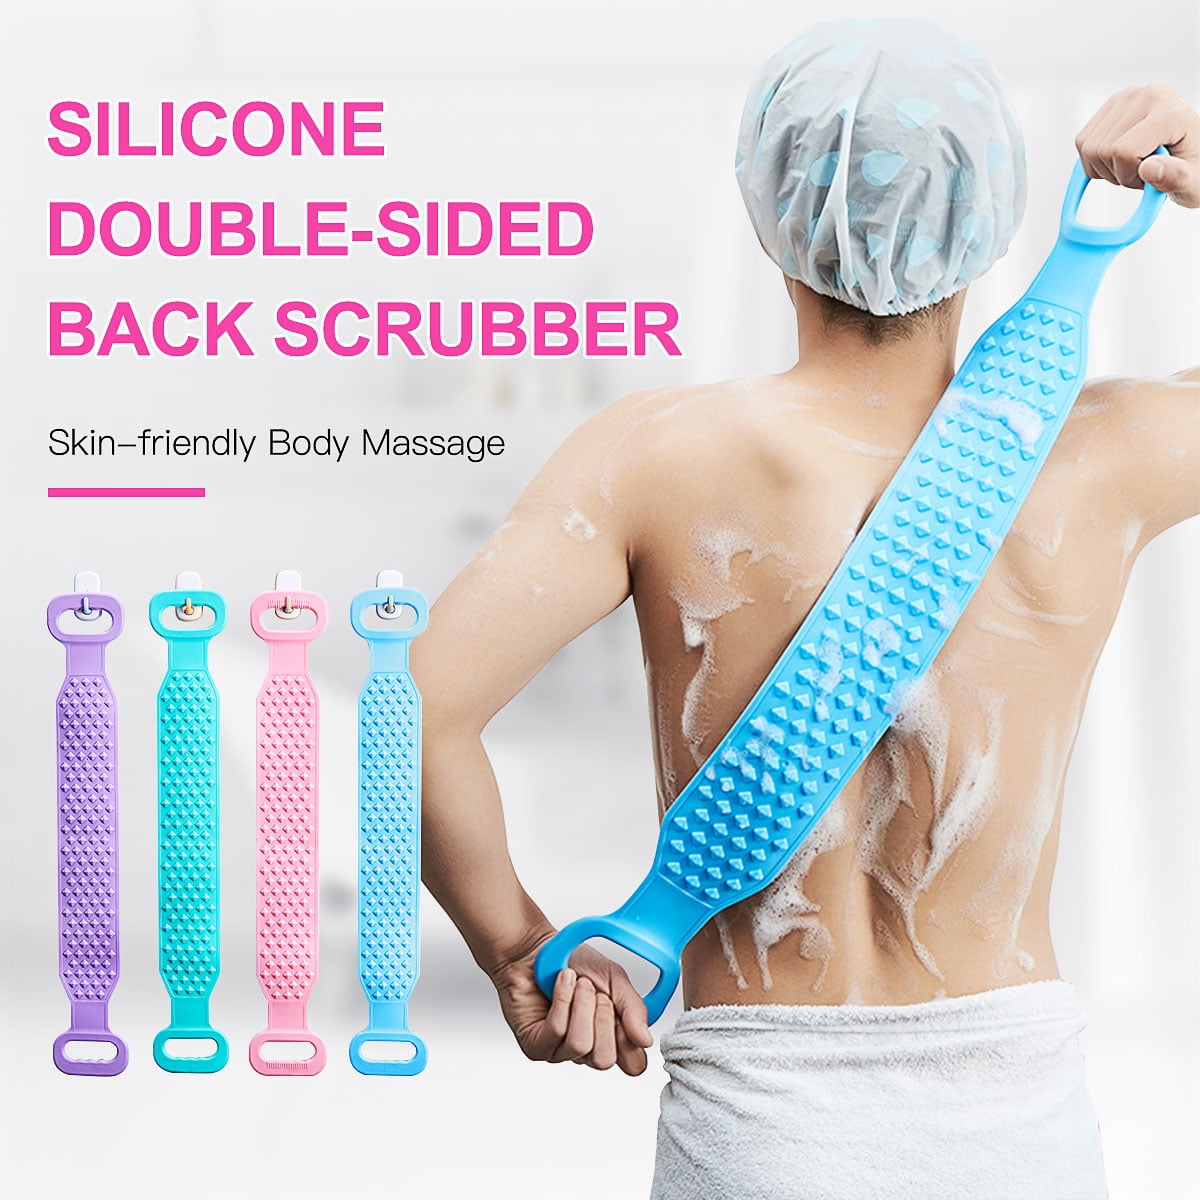 27inch Silicone Back Scrubber For Shower, Double Sided Bath Body Scrubber, Deep Clean Exfoliating Improve Back Acne, Easy to Clean, Comfortable Massage for Men & Women